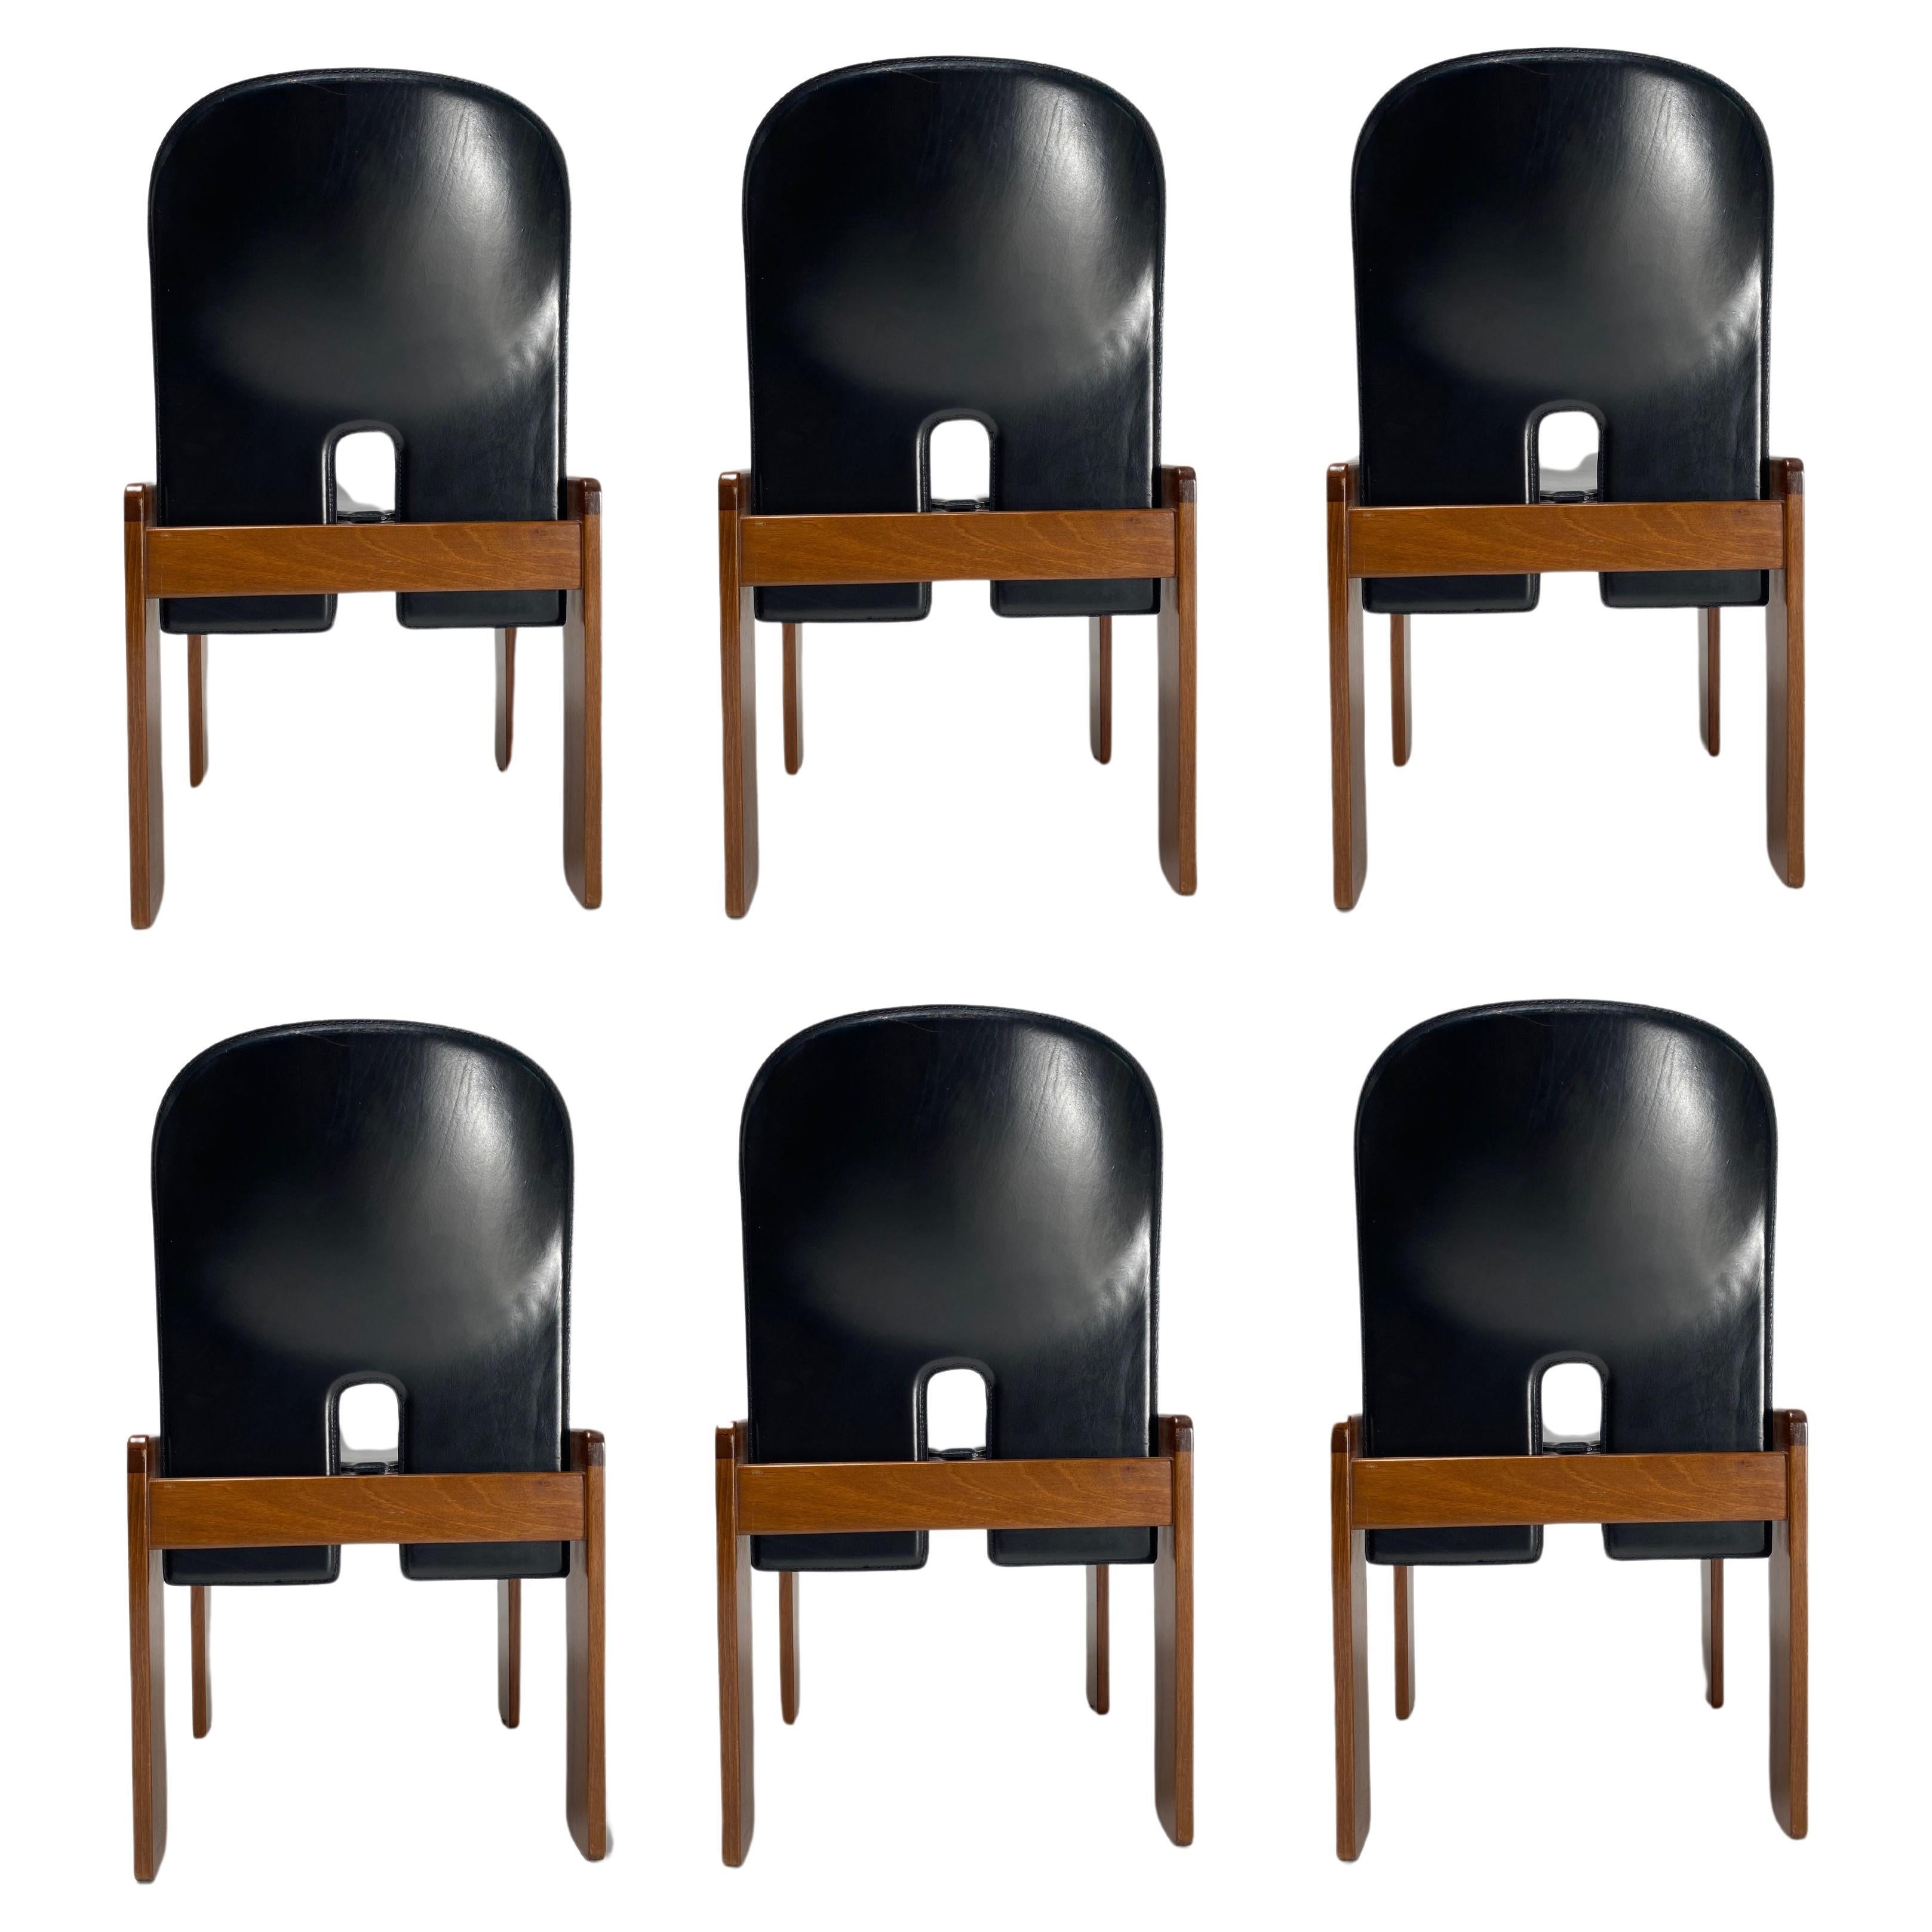 Set of 6 Black Leather "121" Chairs by Tobia Scarpa for Cassina, Italy, 1967 For Sale